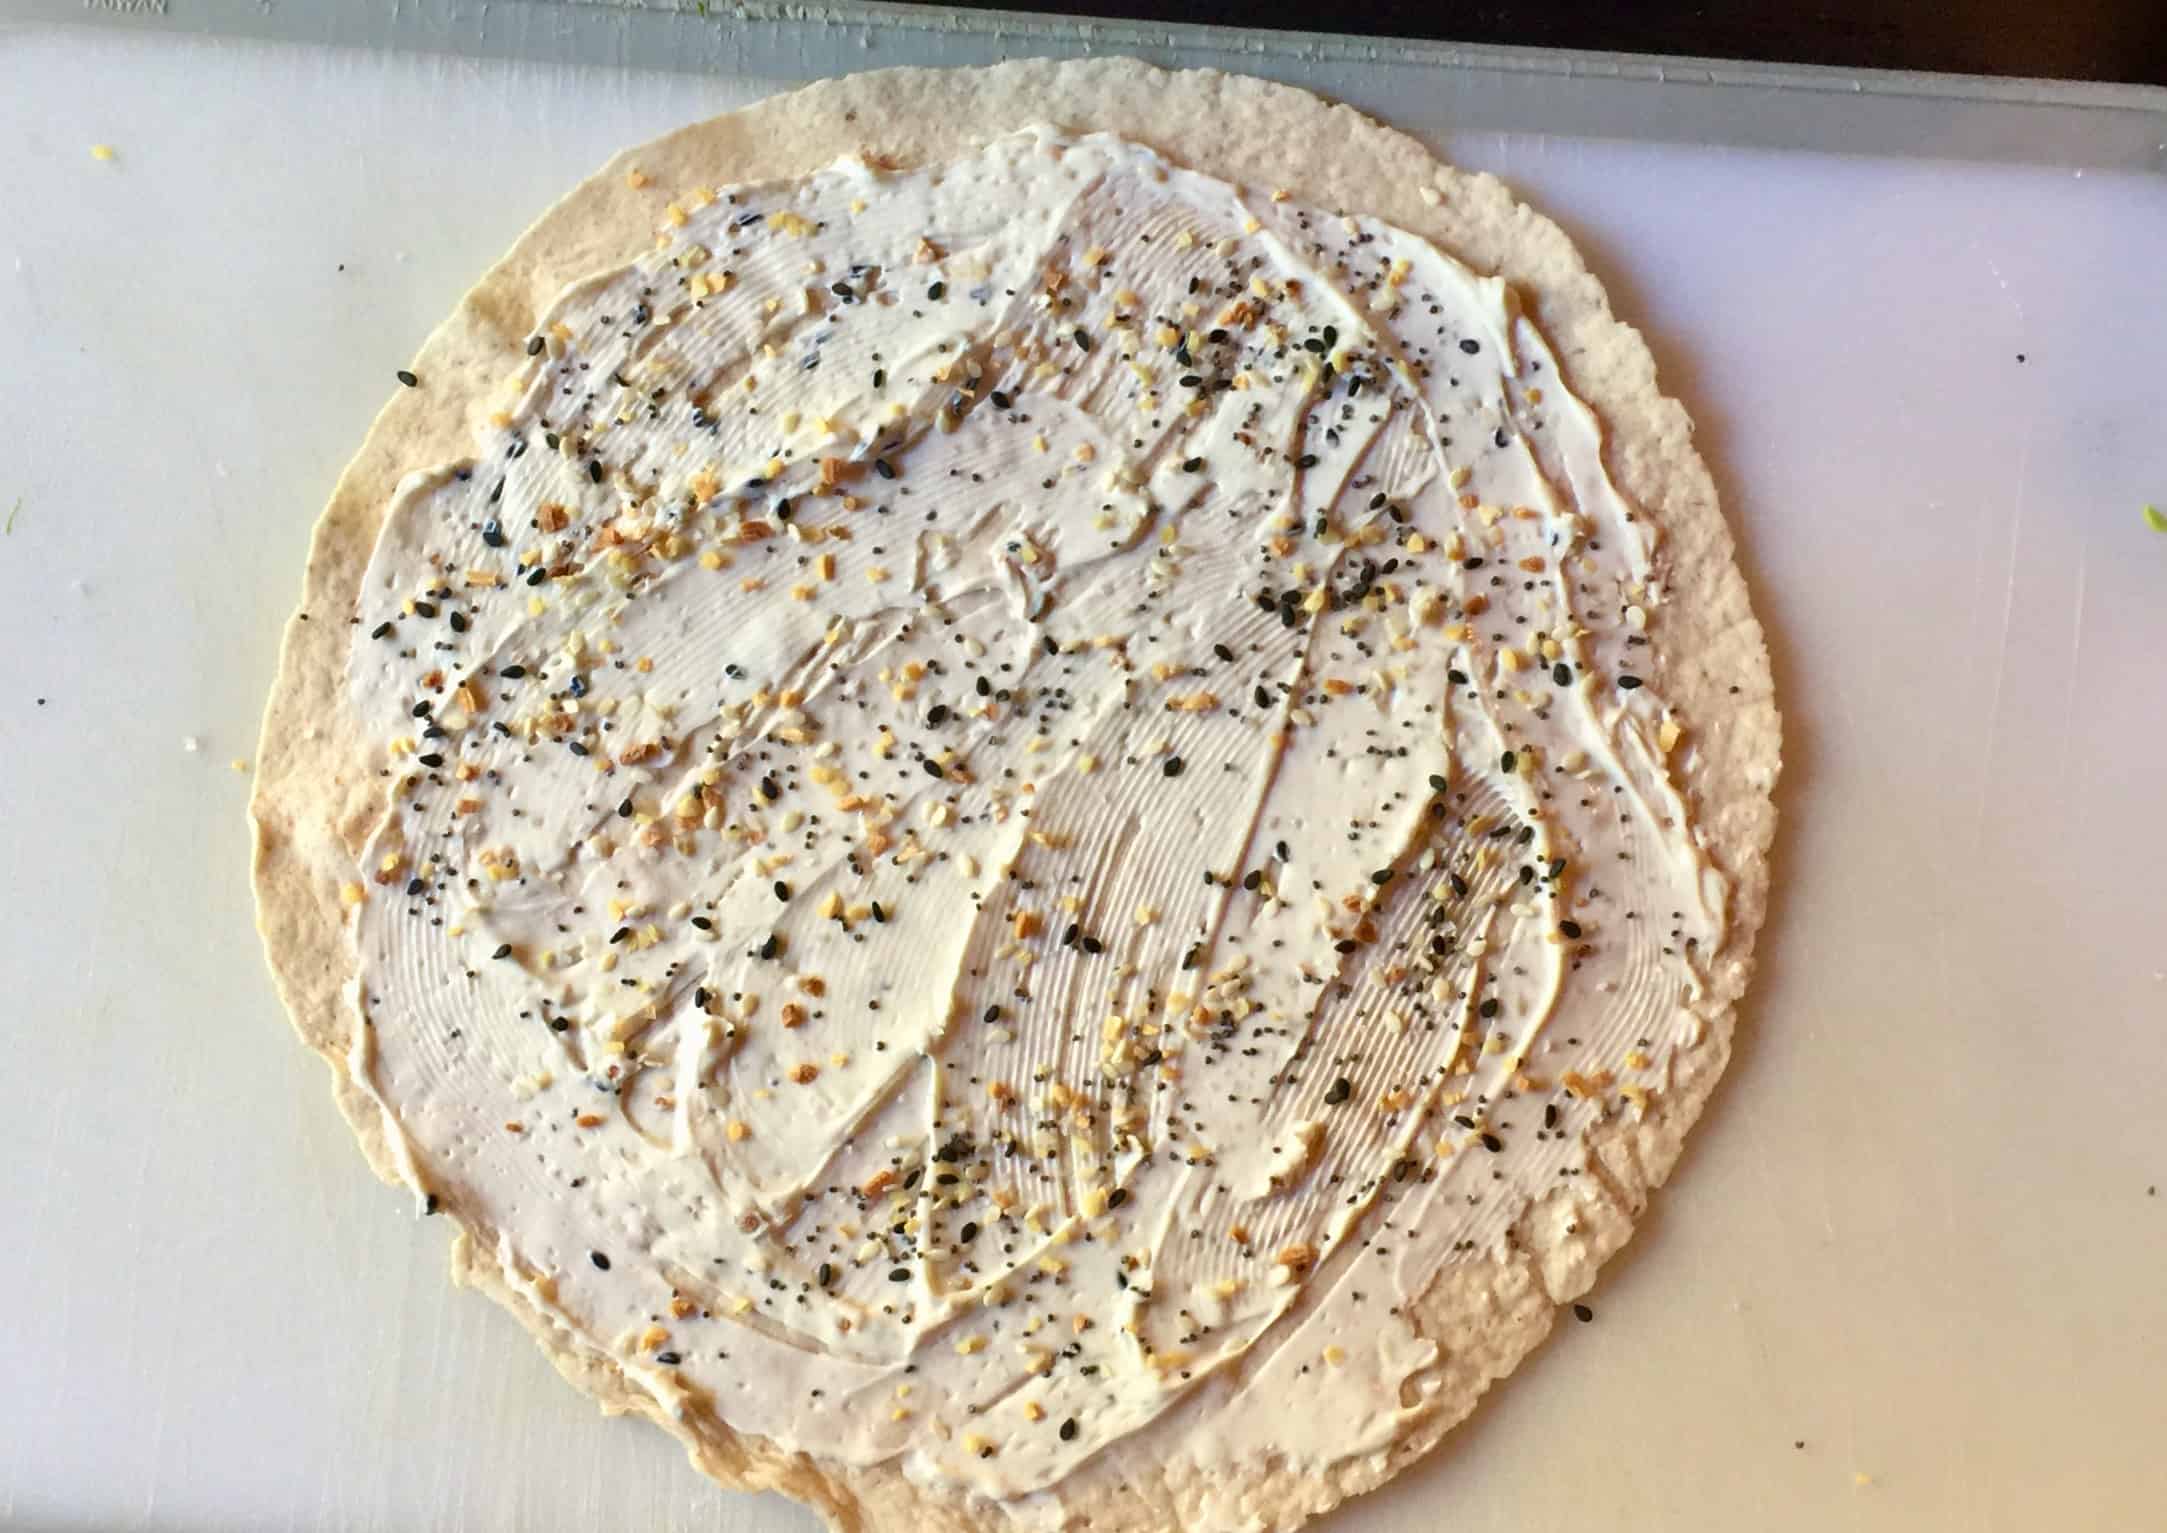 Low carb tortilla with cream cheese spread and everything bagel seasoning.